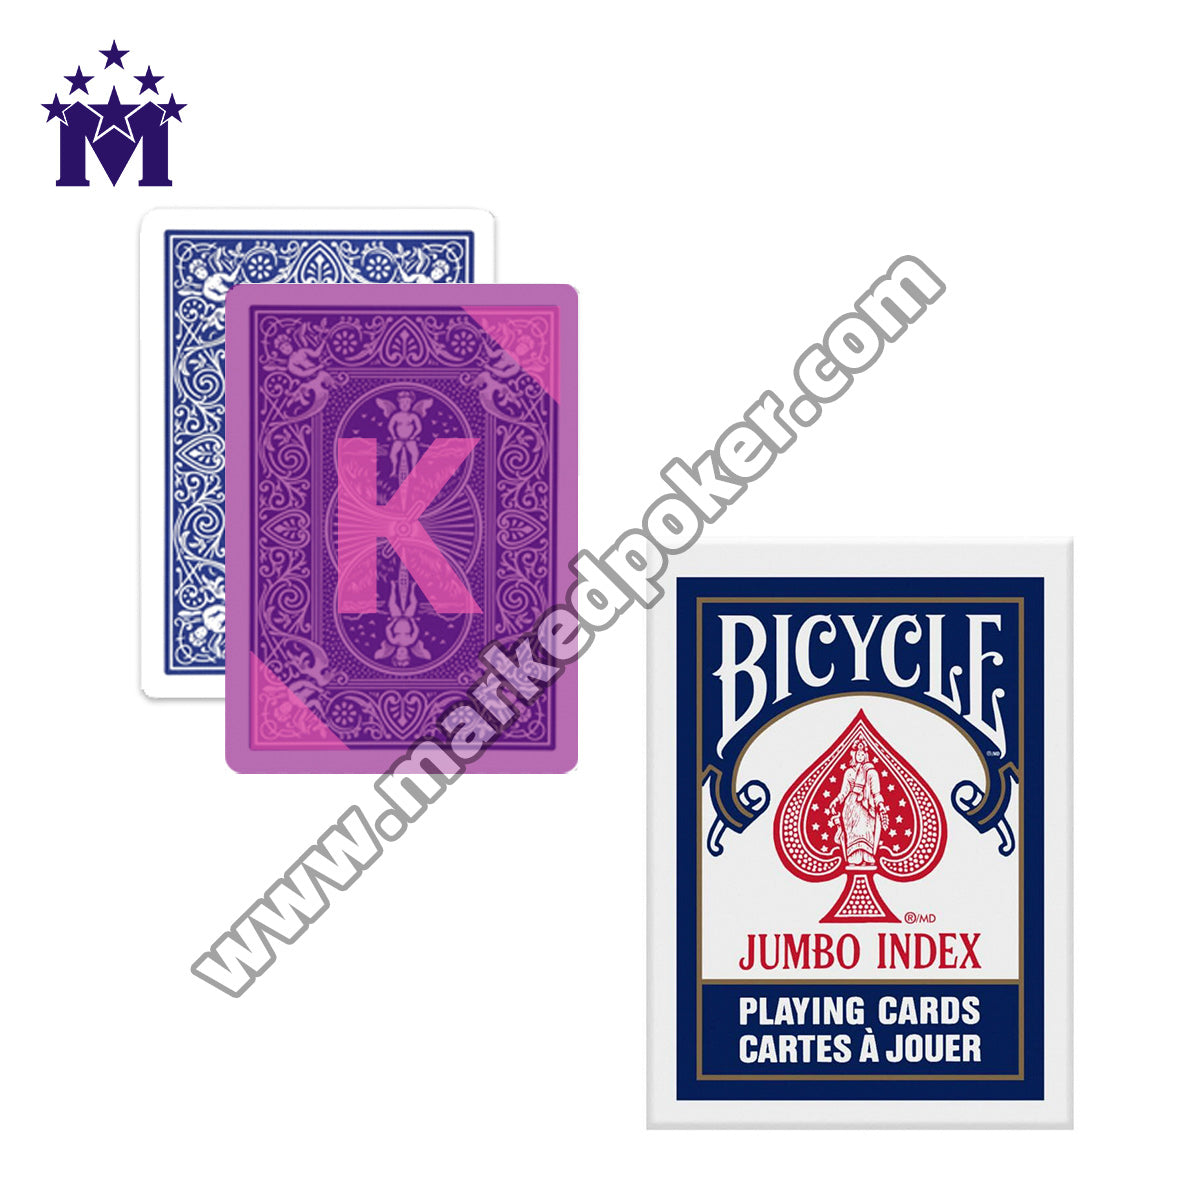 Bicycle Jumbo Index Infrared Marked Playing Cards